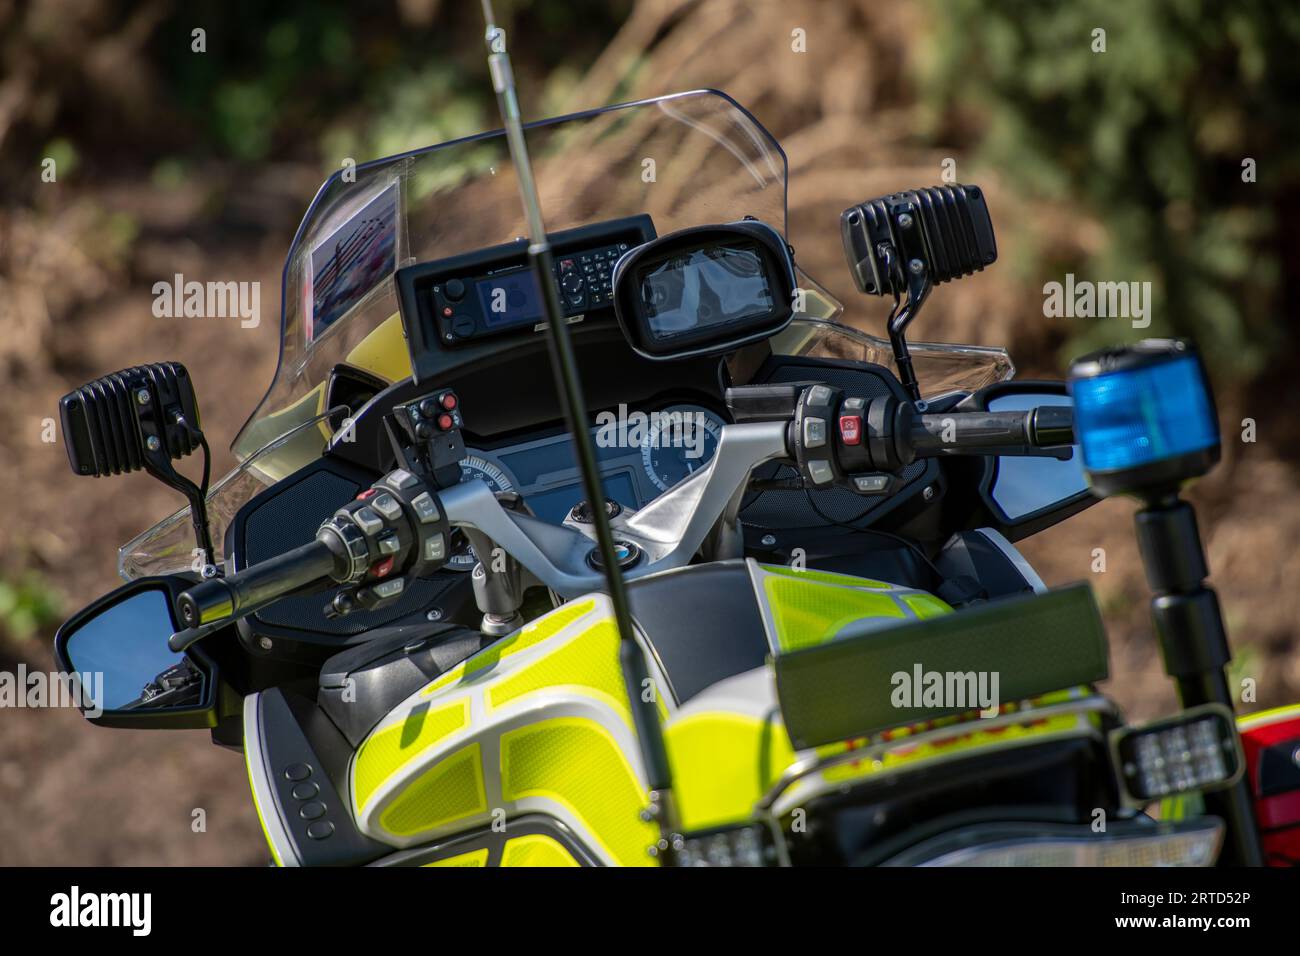 close up of police traffic offer bmw motorcycle. Stock Photo